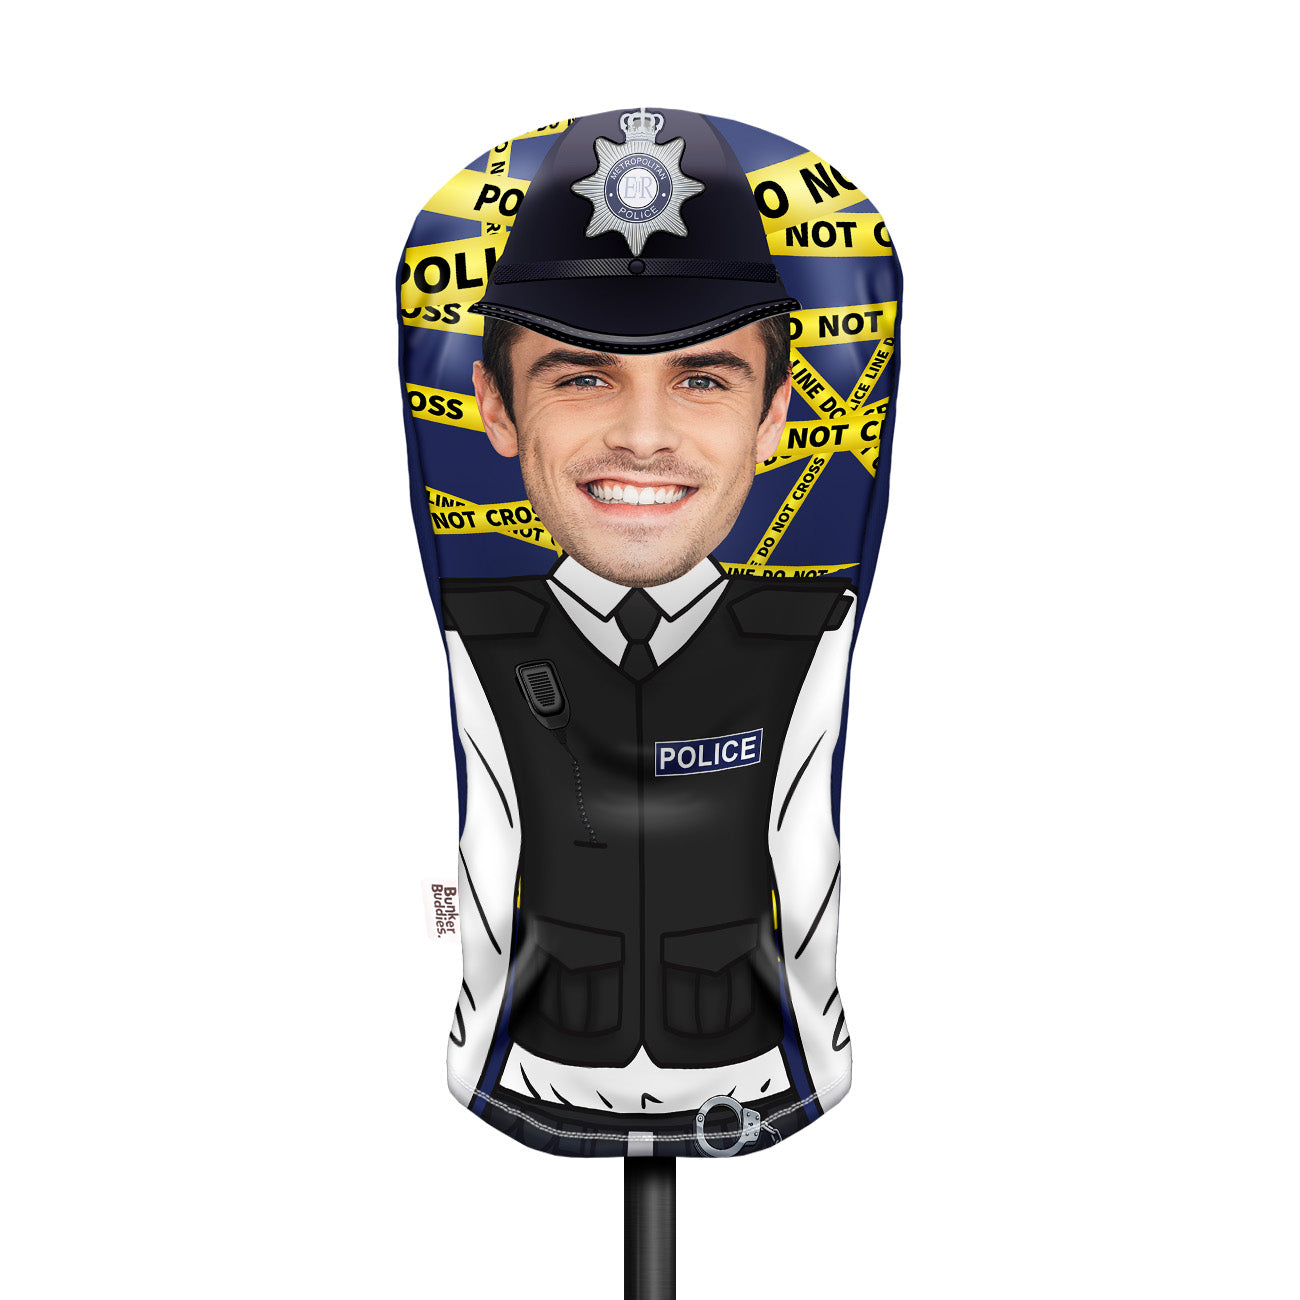 Policeman Personalised Golf Head Cover